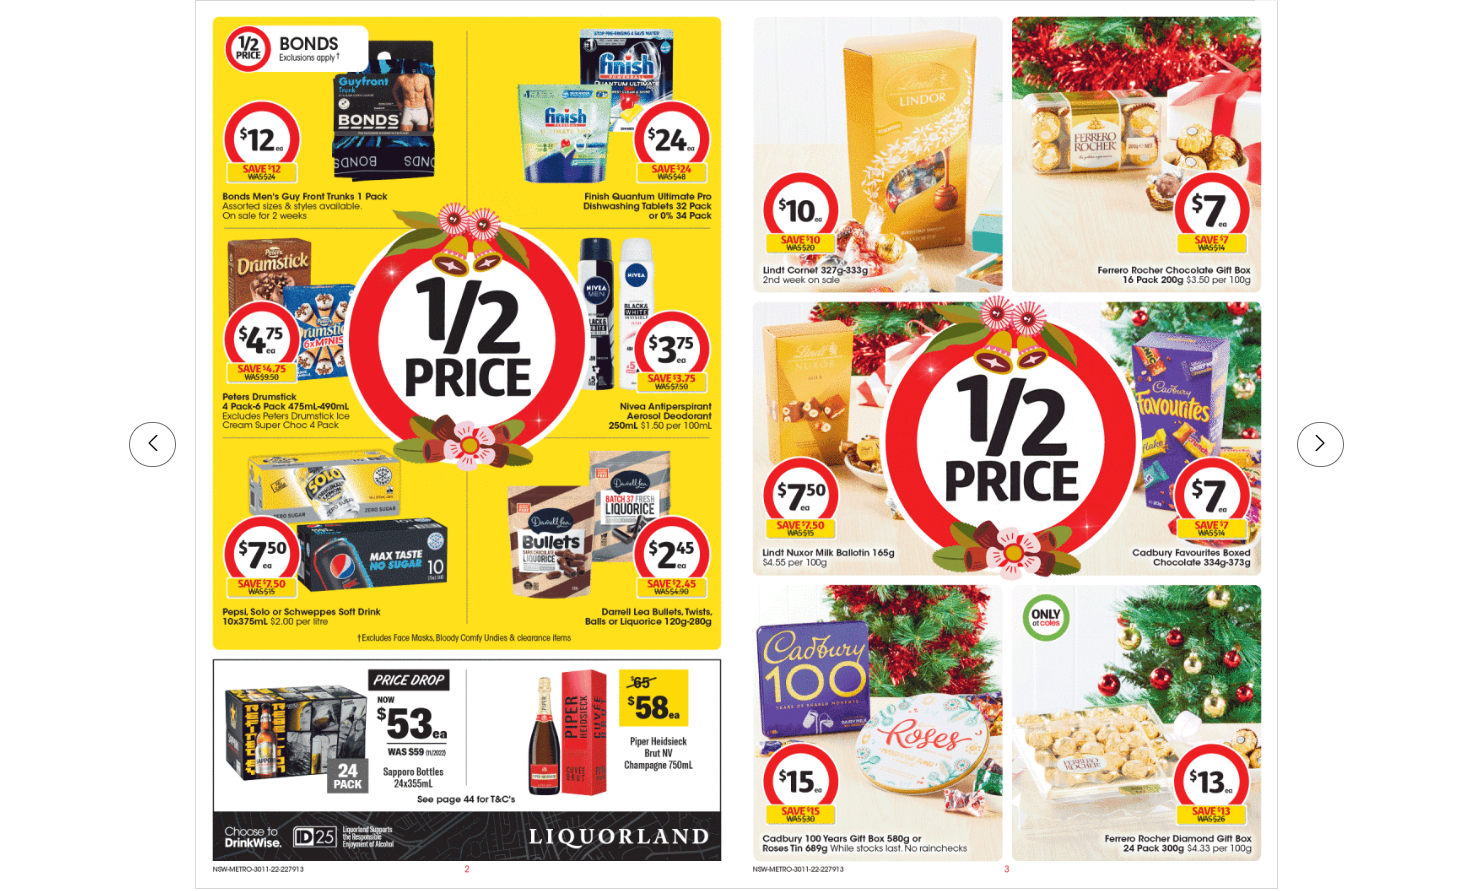 Coles Catalogue - 1/2 price Kettle Potato Chips, Cadbury Choc & Pepsi, Solo or Schweppes soft drinks